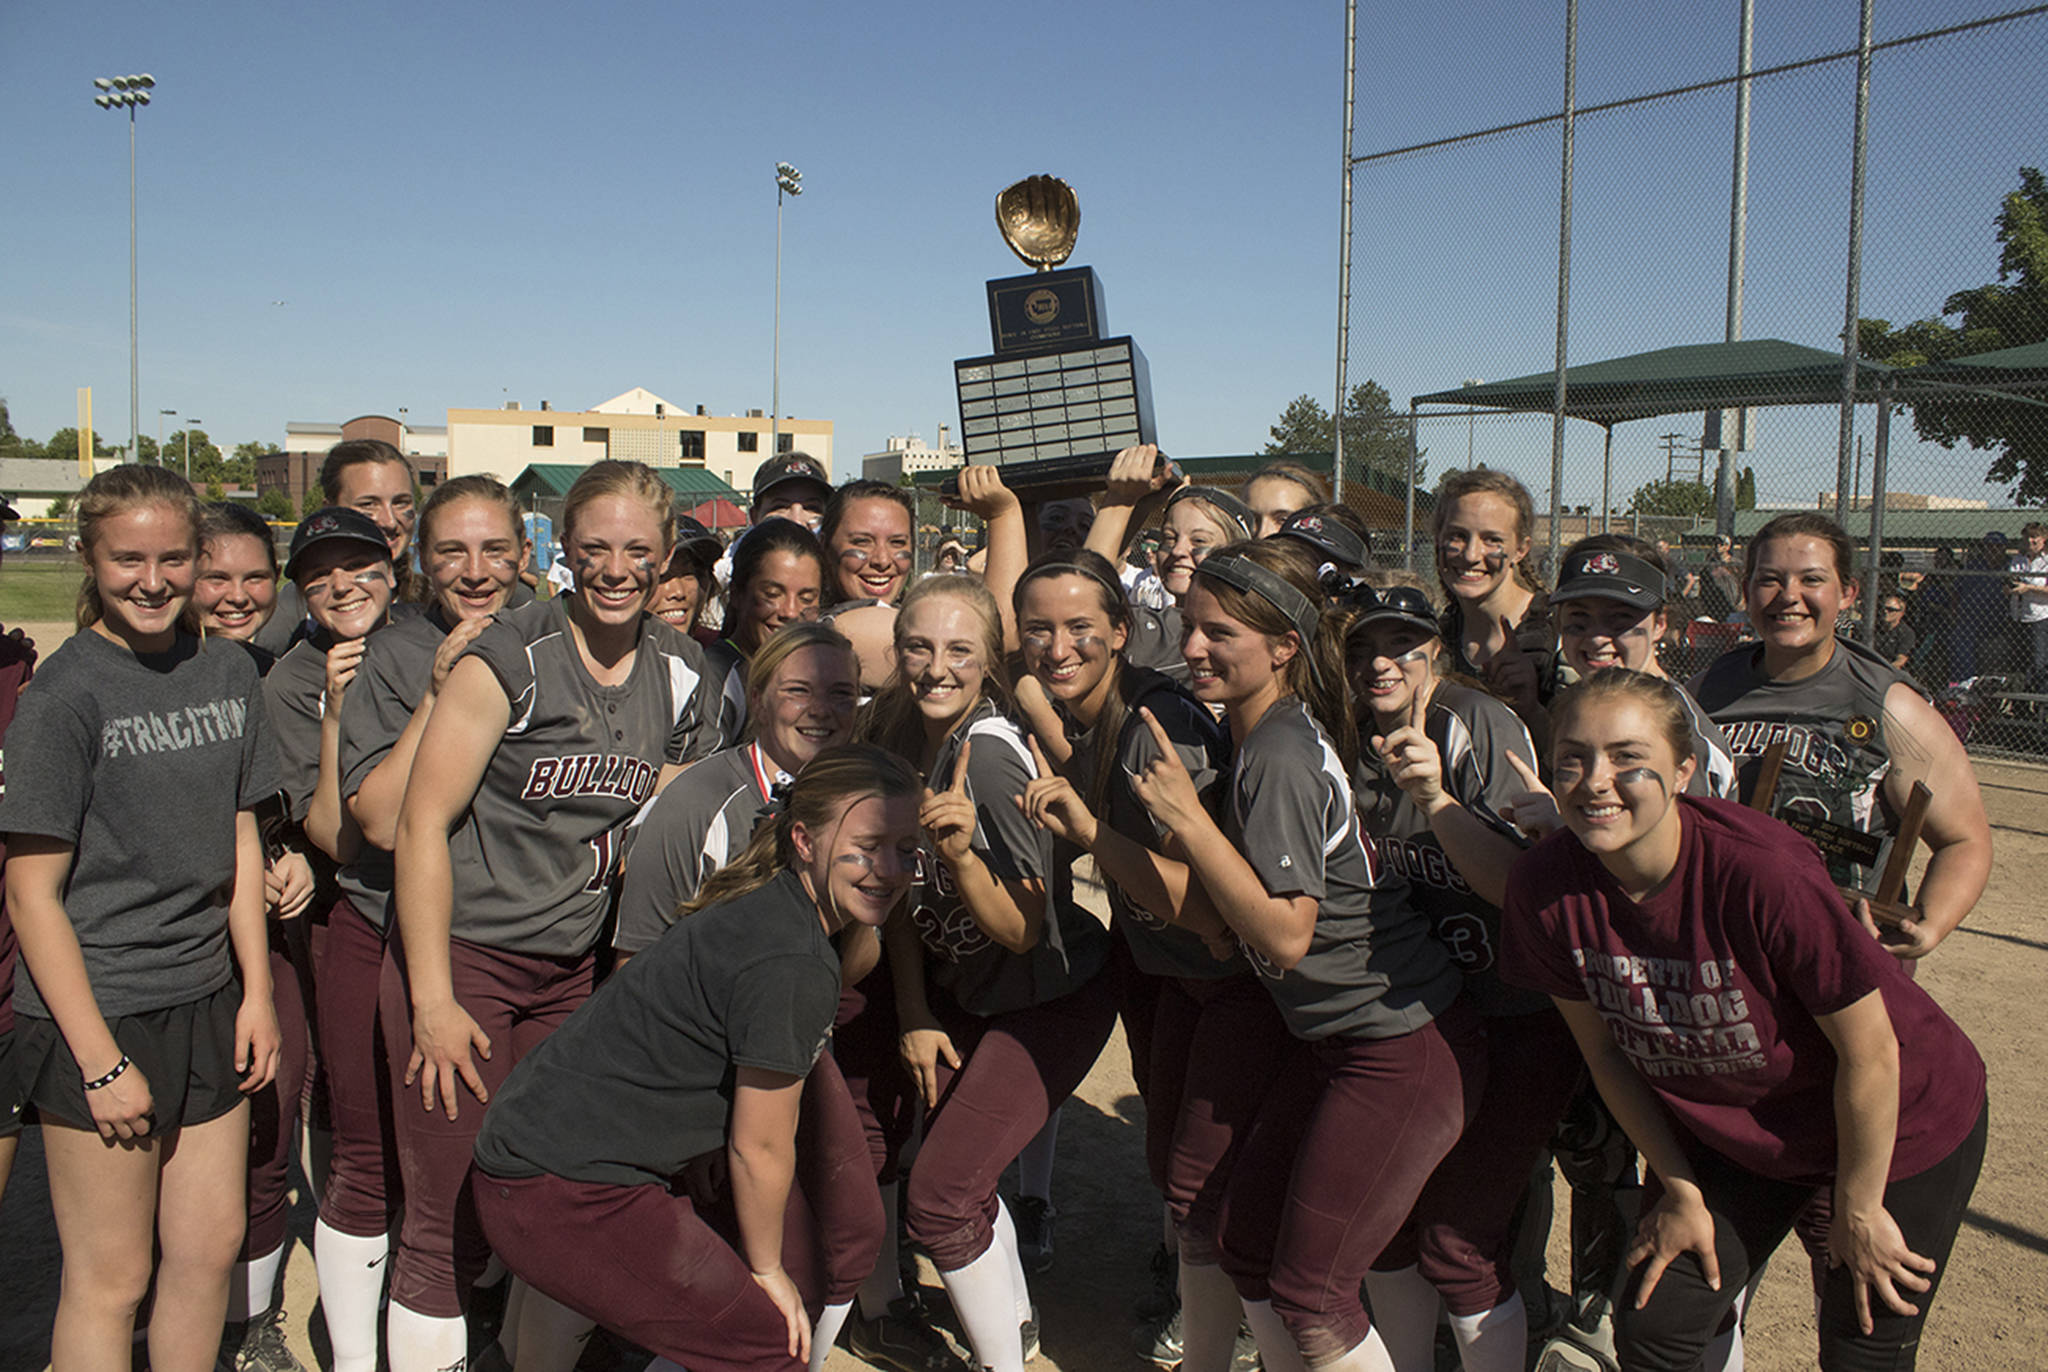 (Brendan Carl | The Daily World) Montesano lifts the state 1A softball title after defeating La Center 8-2 on Saturday.